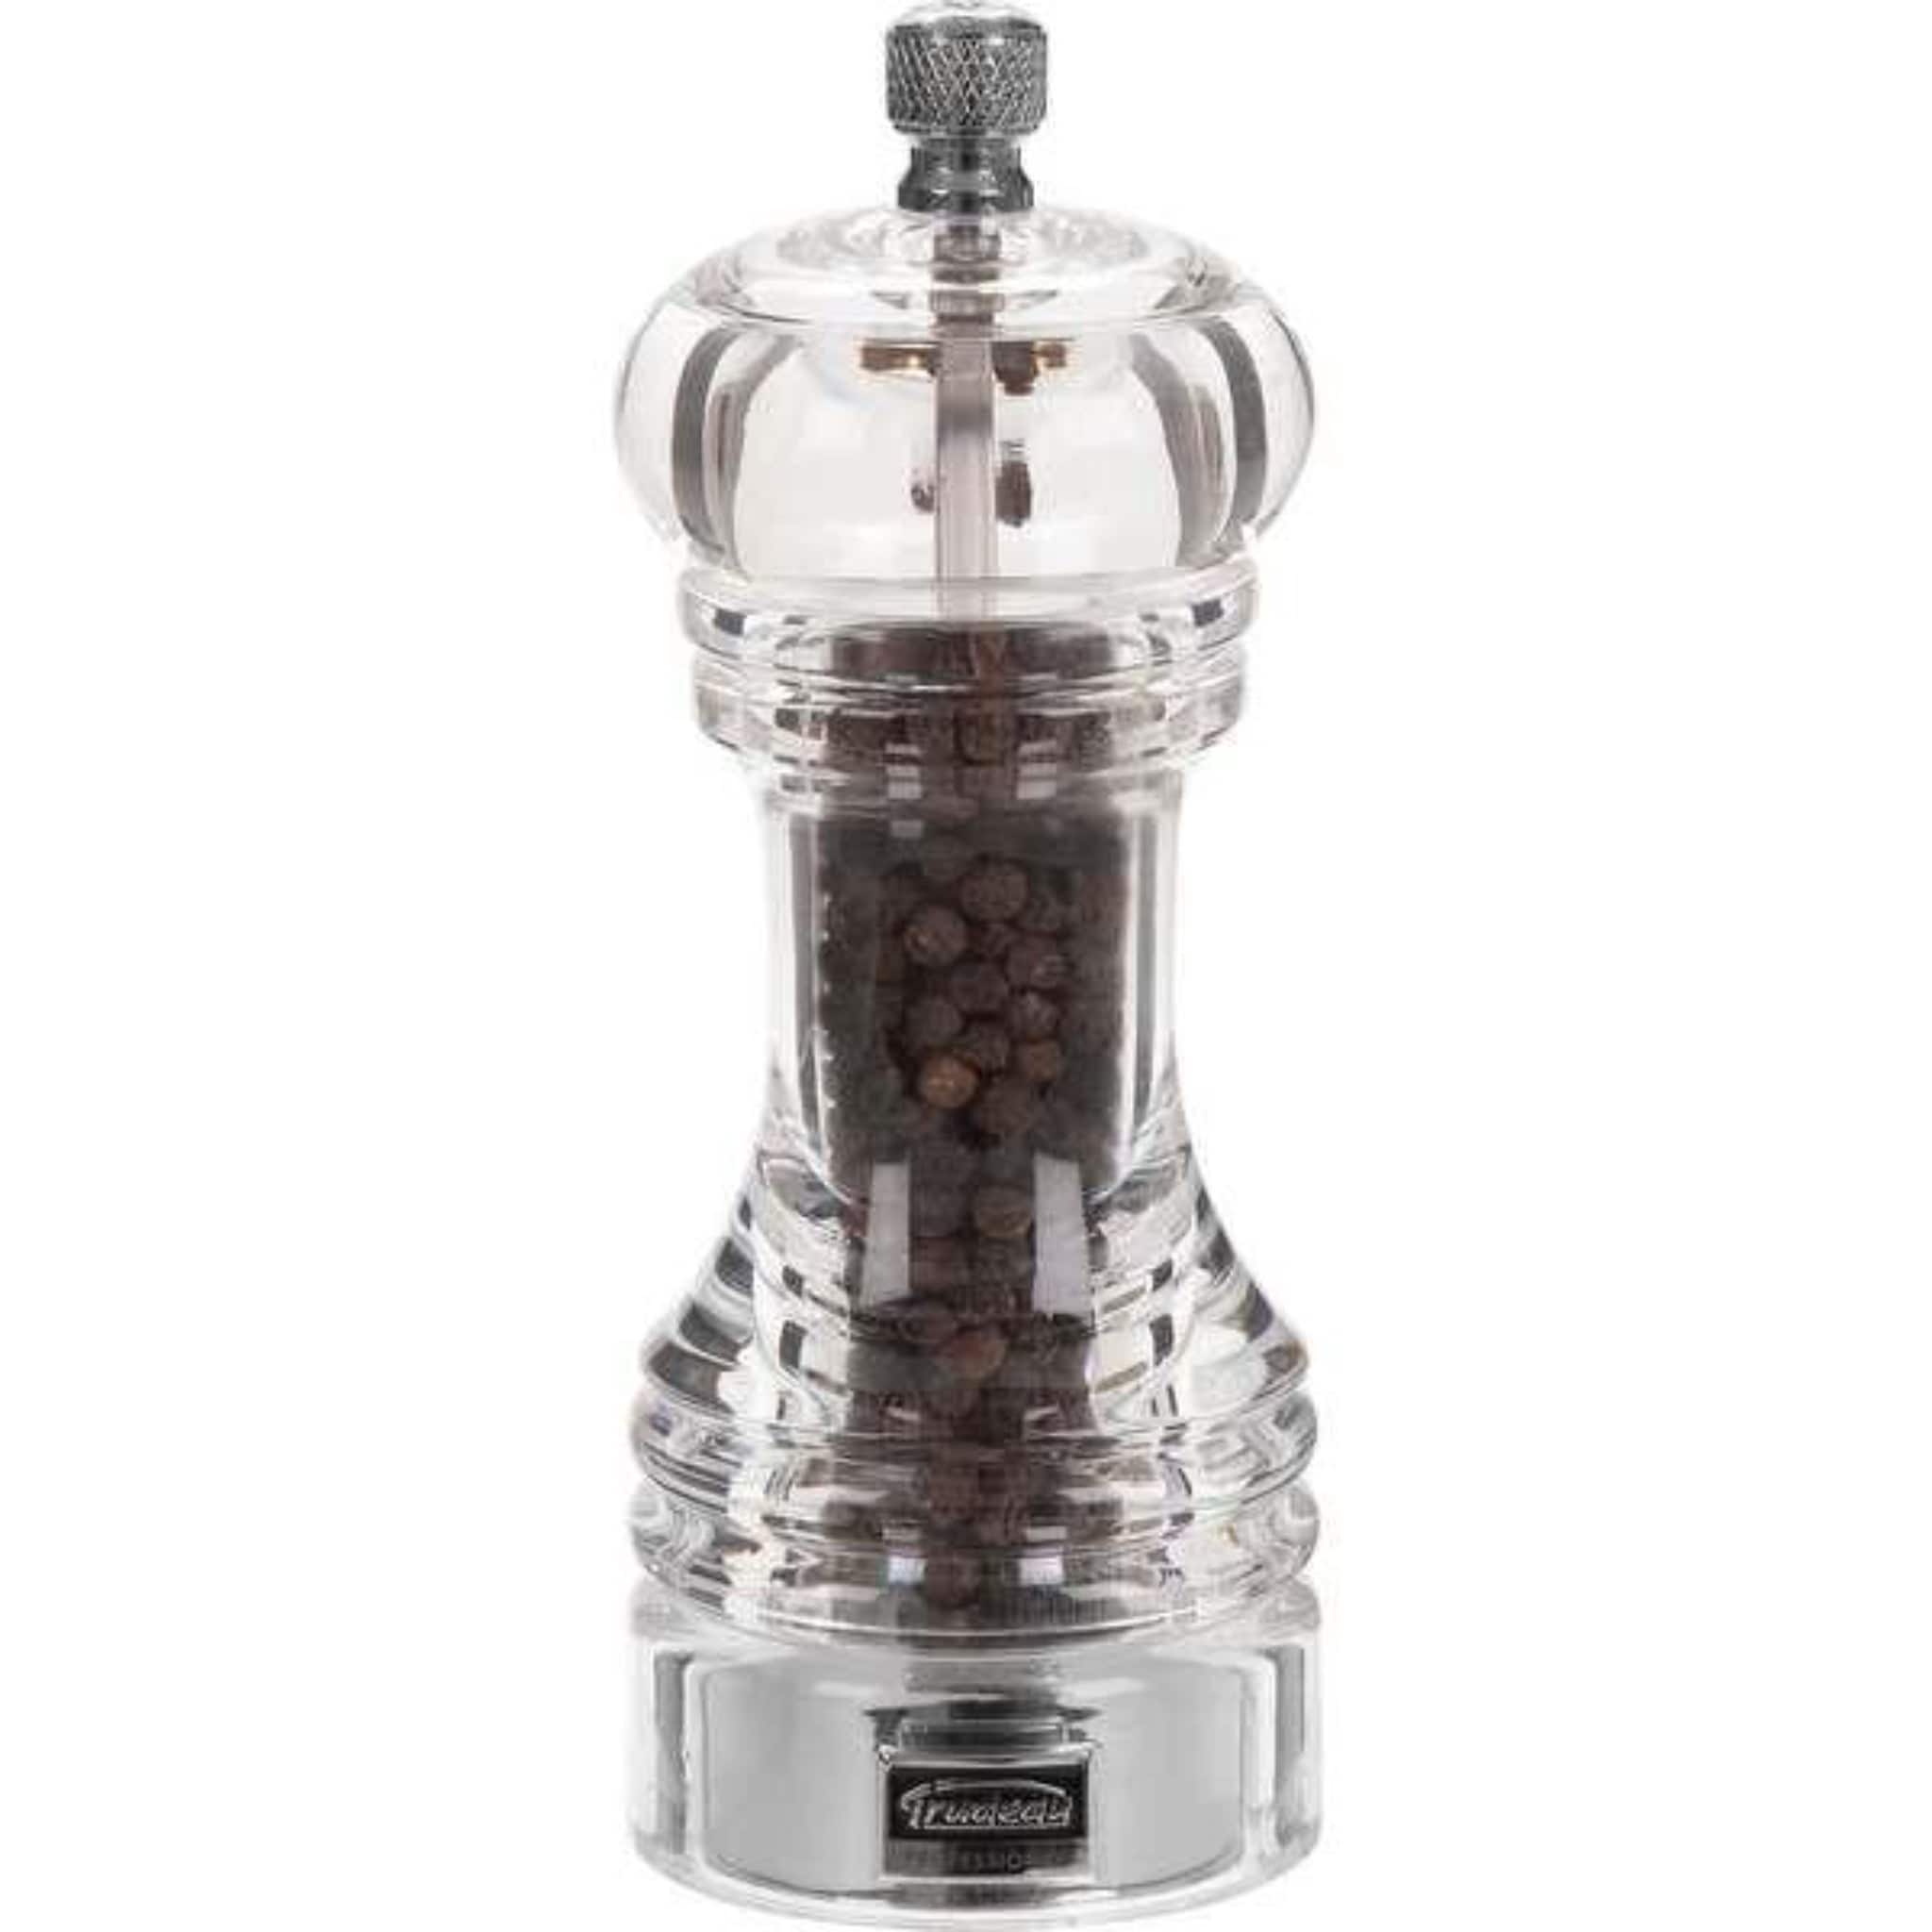 Professional 6-inch Pepper Mill in Crystal Clear Acrylic Finish